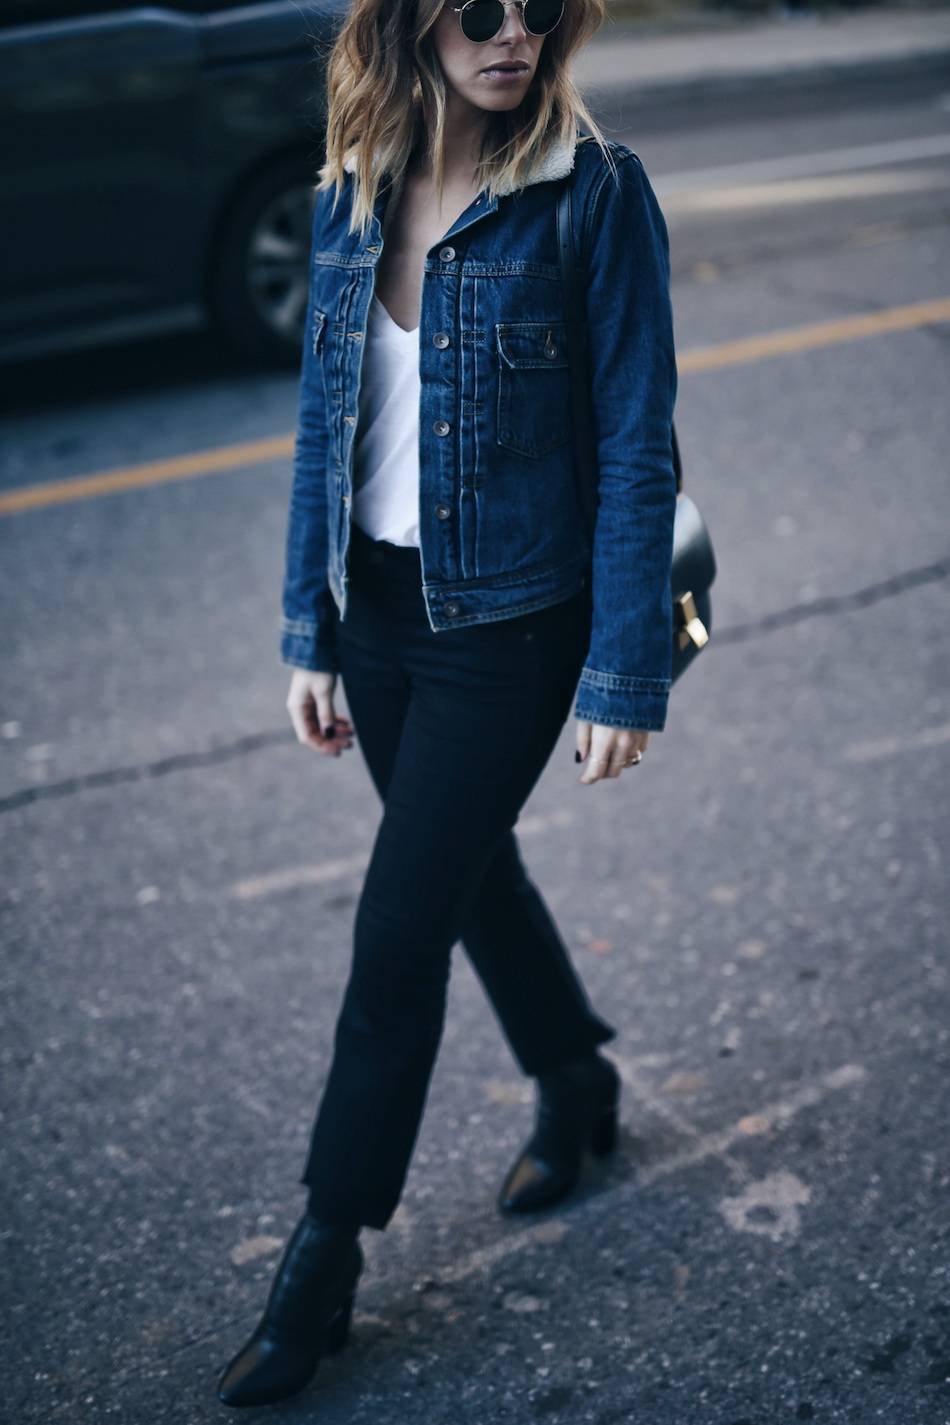 Denim + Shearling  Denim jacket outfit, Jacket outfits, Outfits